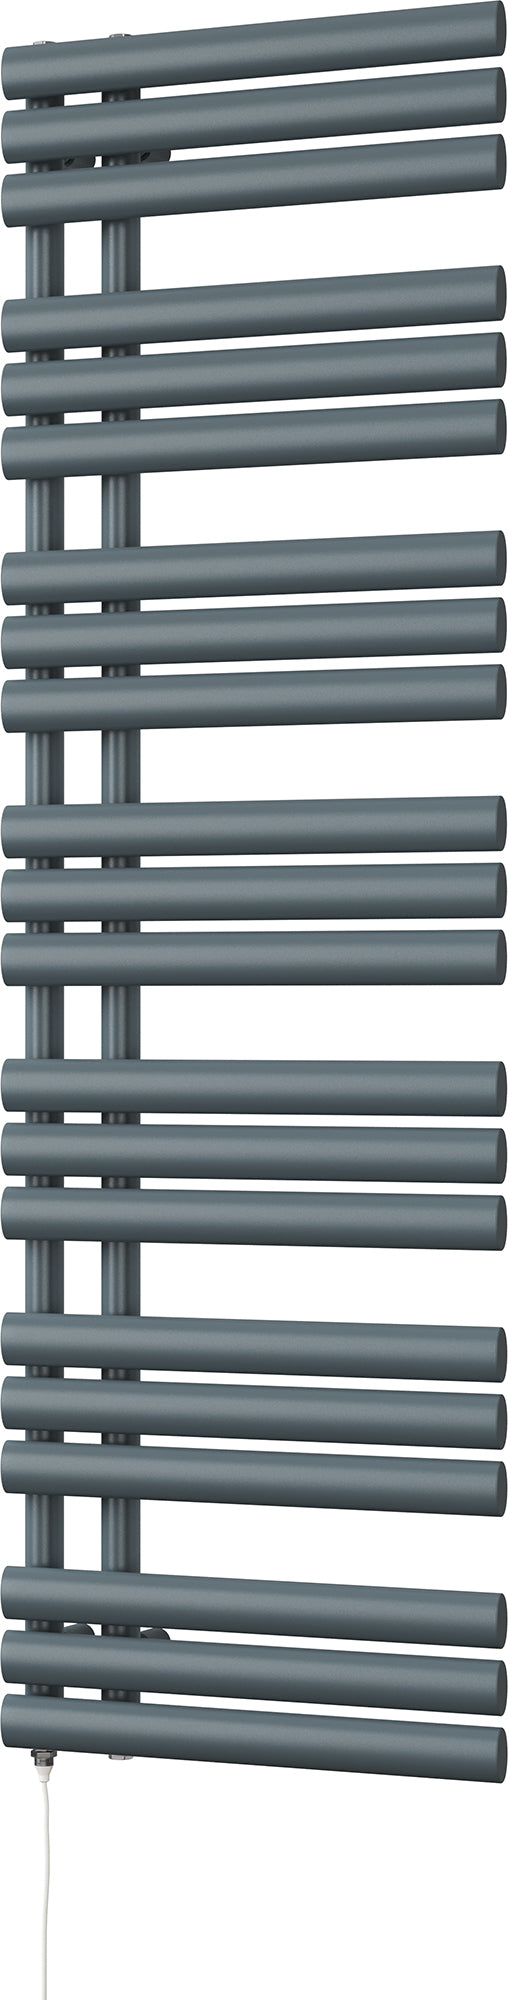 Percival - Anthracite Electric Towel Rail H1592mm x W500mm 600w Standard